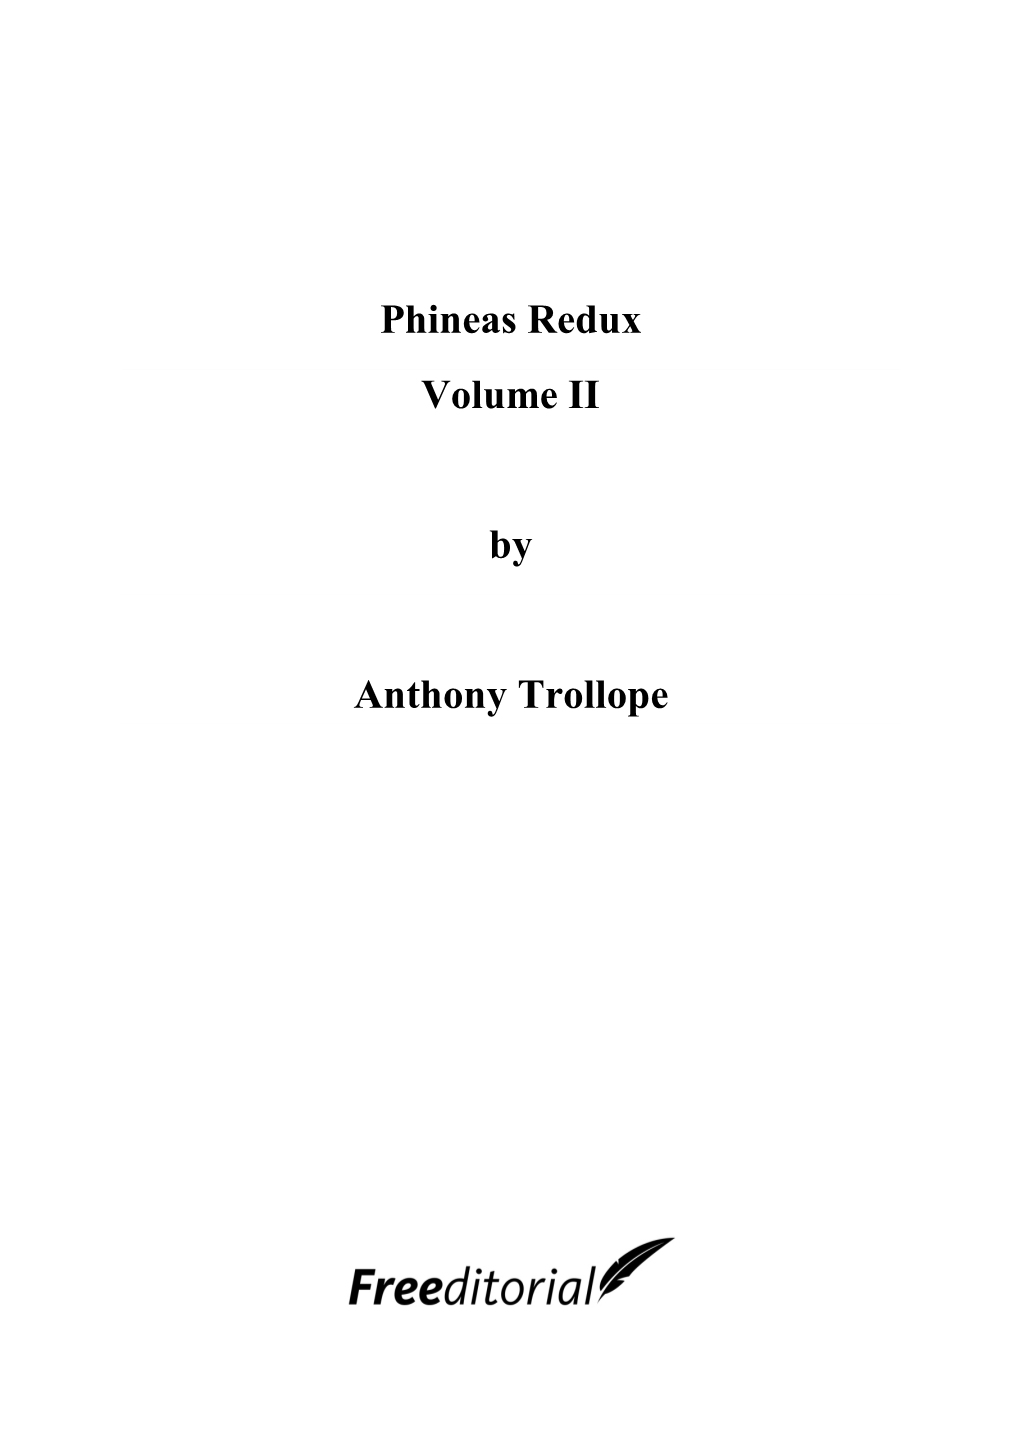 Phineas Redux Volume II by Anthony Trollope